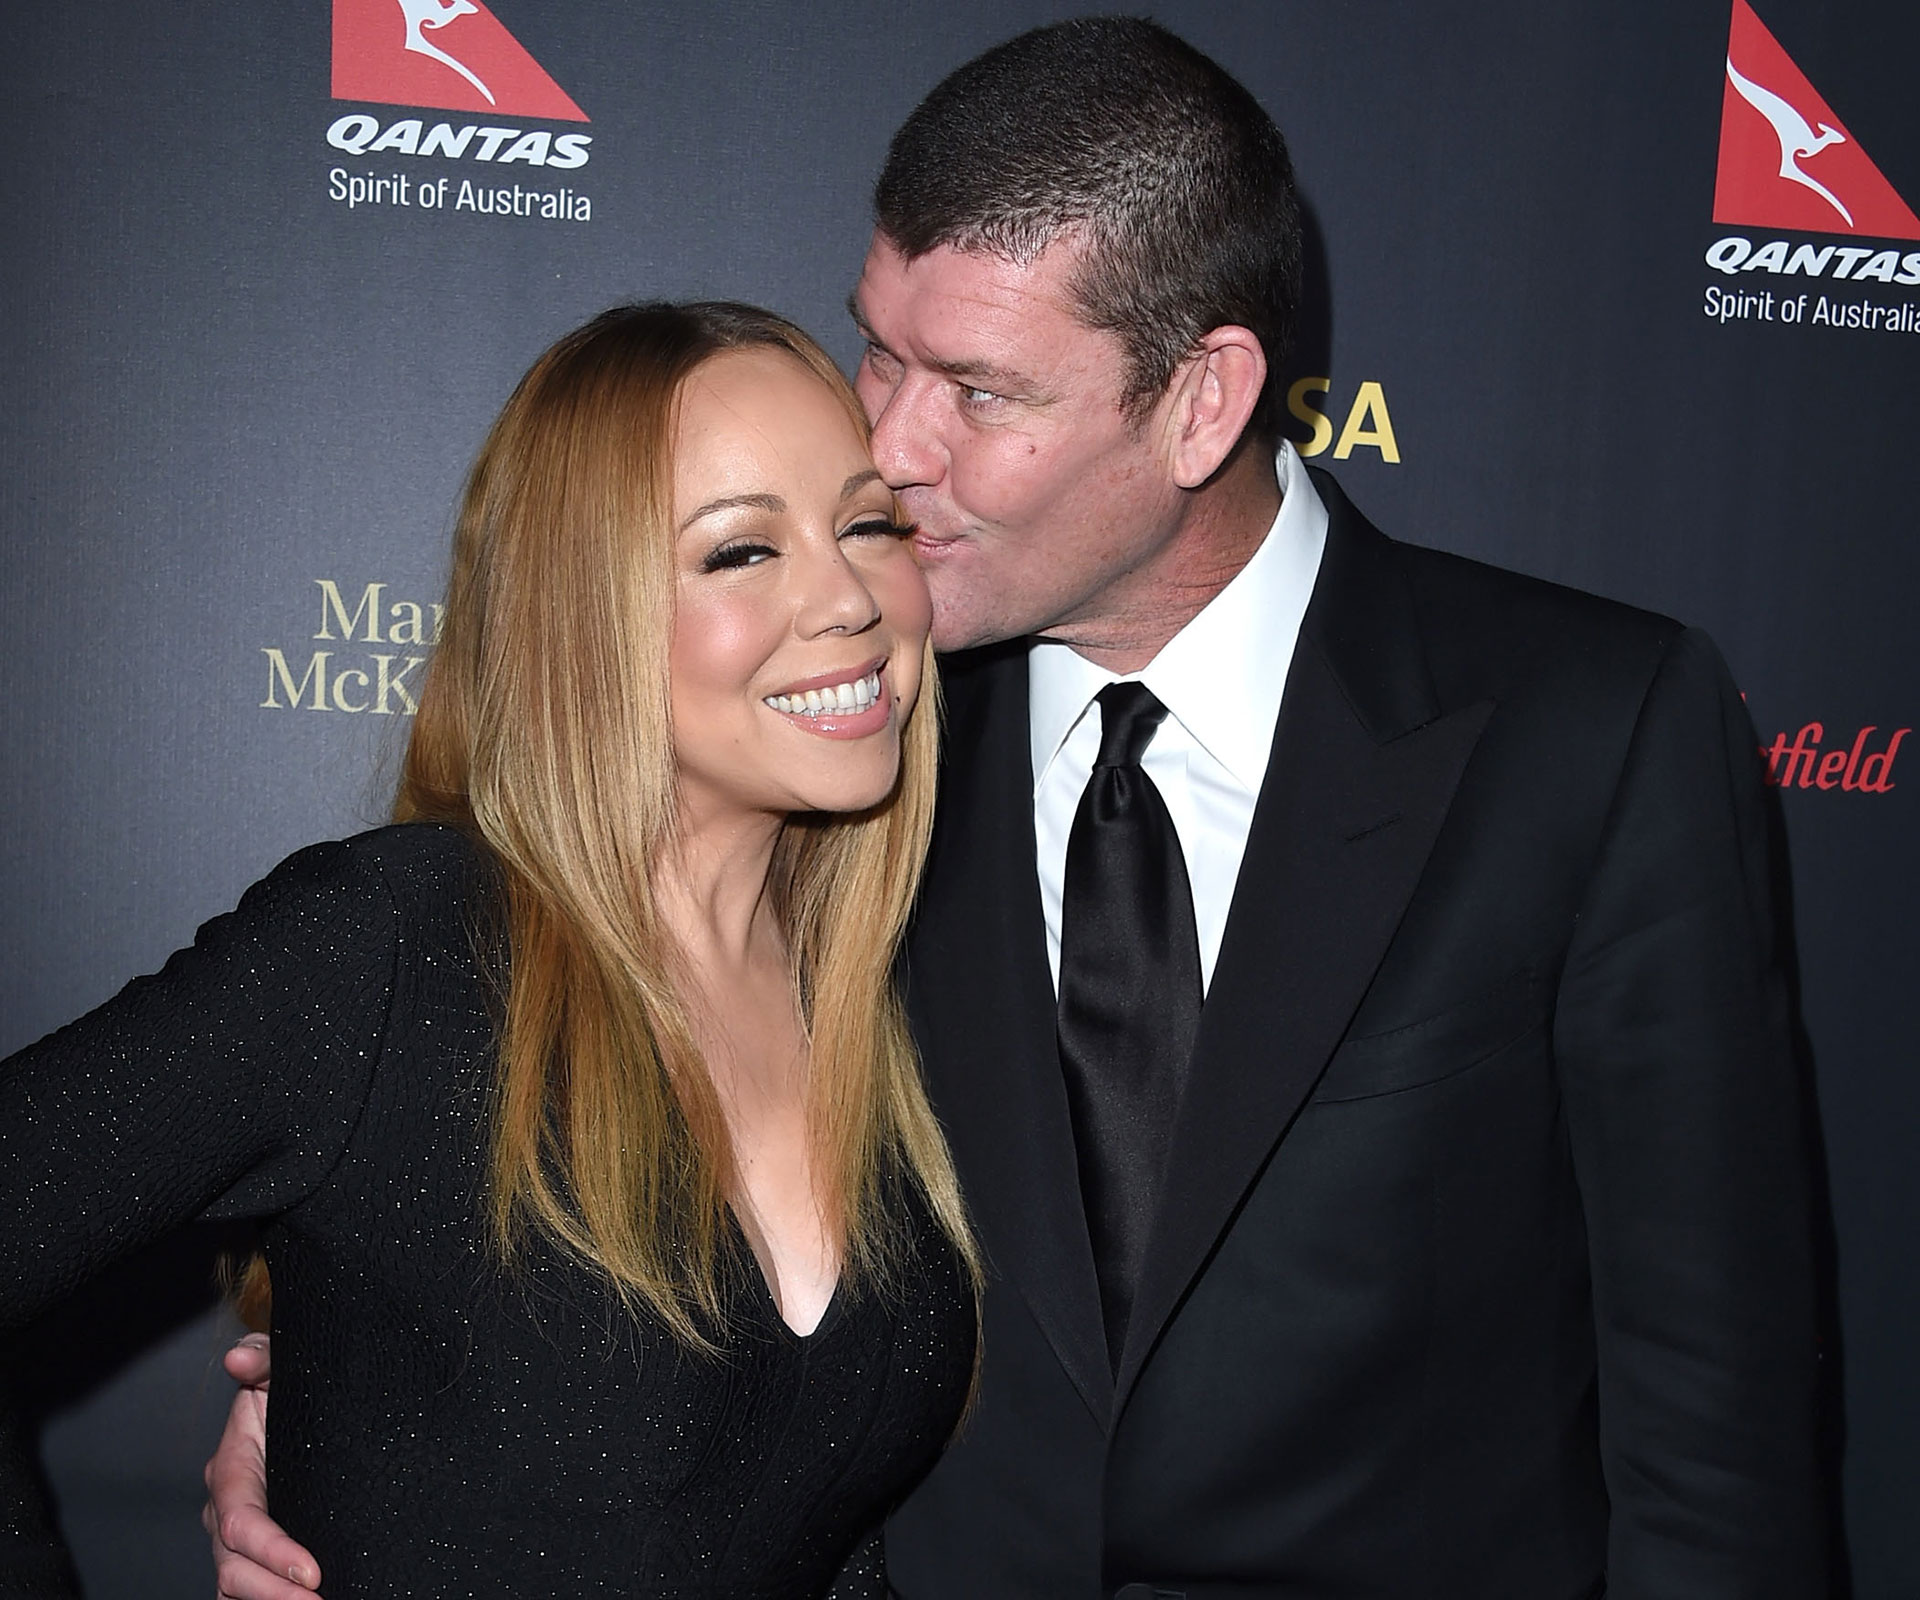 The truth about James and Mariah’s romance